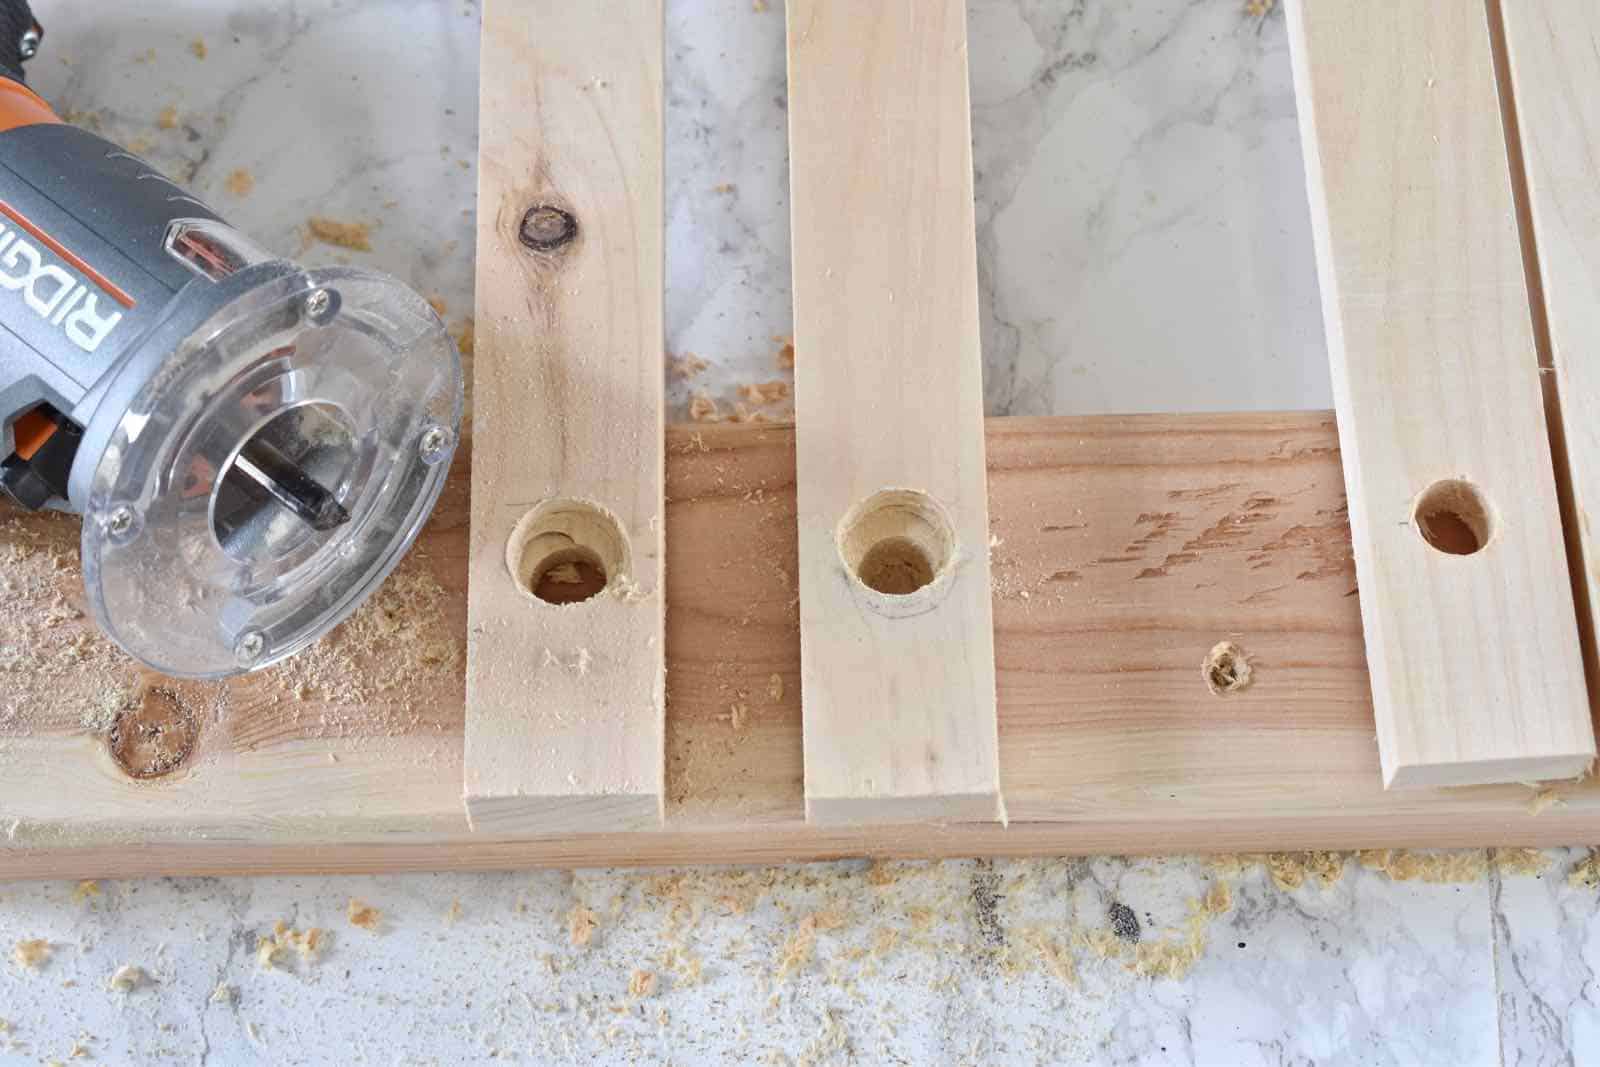 MAke a hole with router